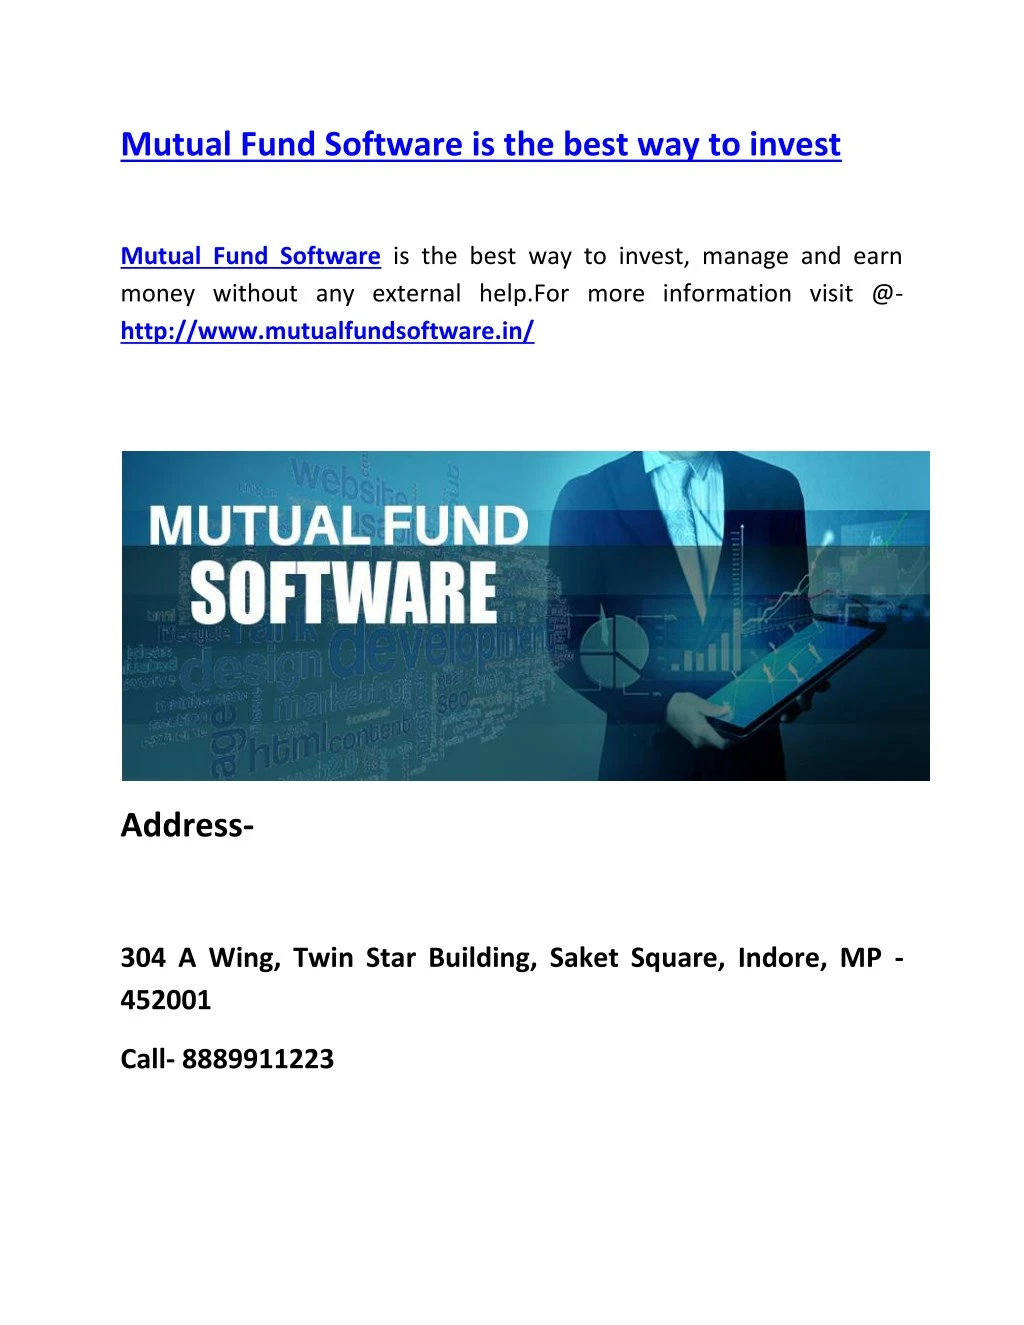 mutual fund software is the best way to invest